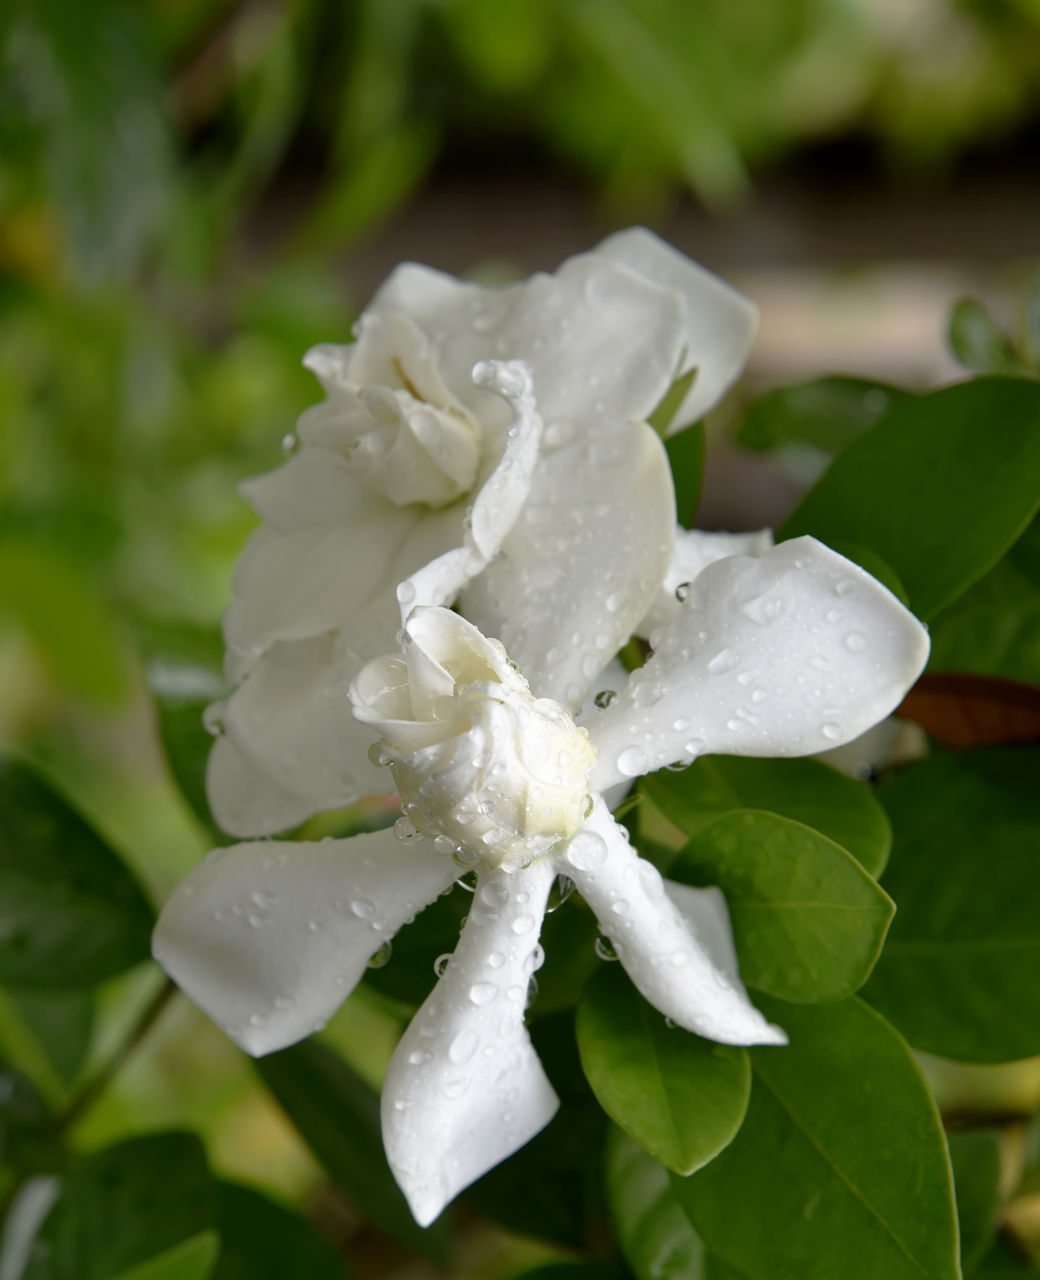 flower, plant, flowering plant, leaf, nature, plant part, drop, beauty in nature, freshness, water, close-up, wet, blossom, gardenia, white, macro photography, petal, growth, no people, flower head, shrub, inflorescence, outdoors, fragility, focus on foreground, green, springtime, rain, dew